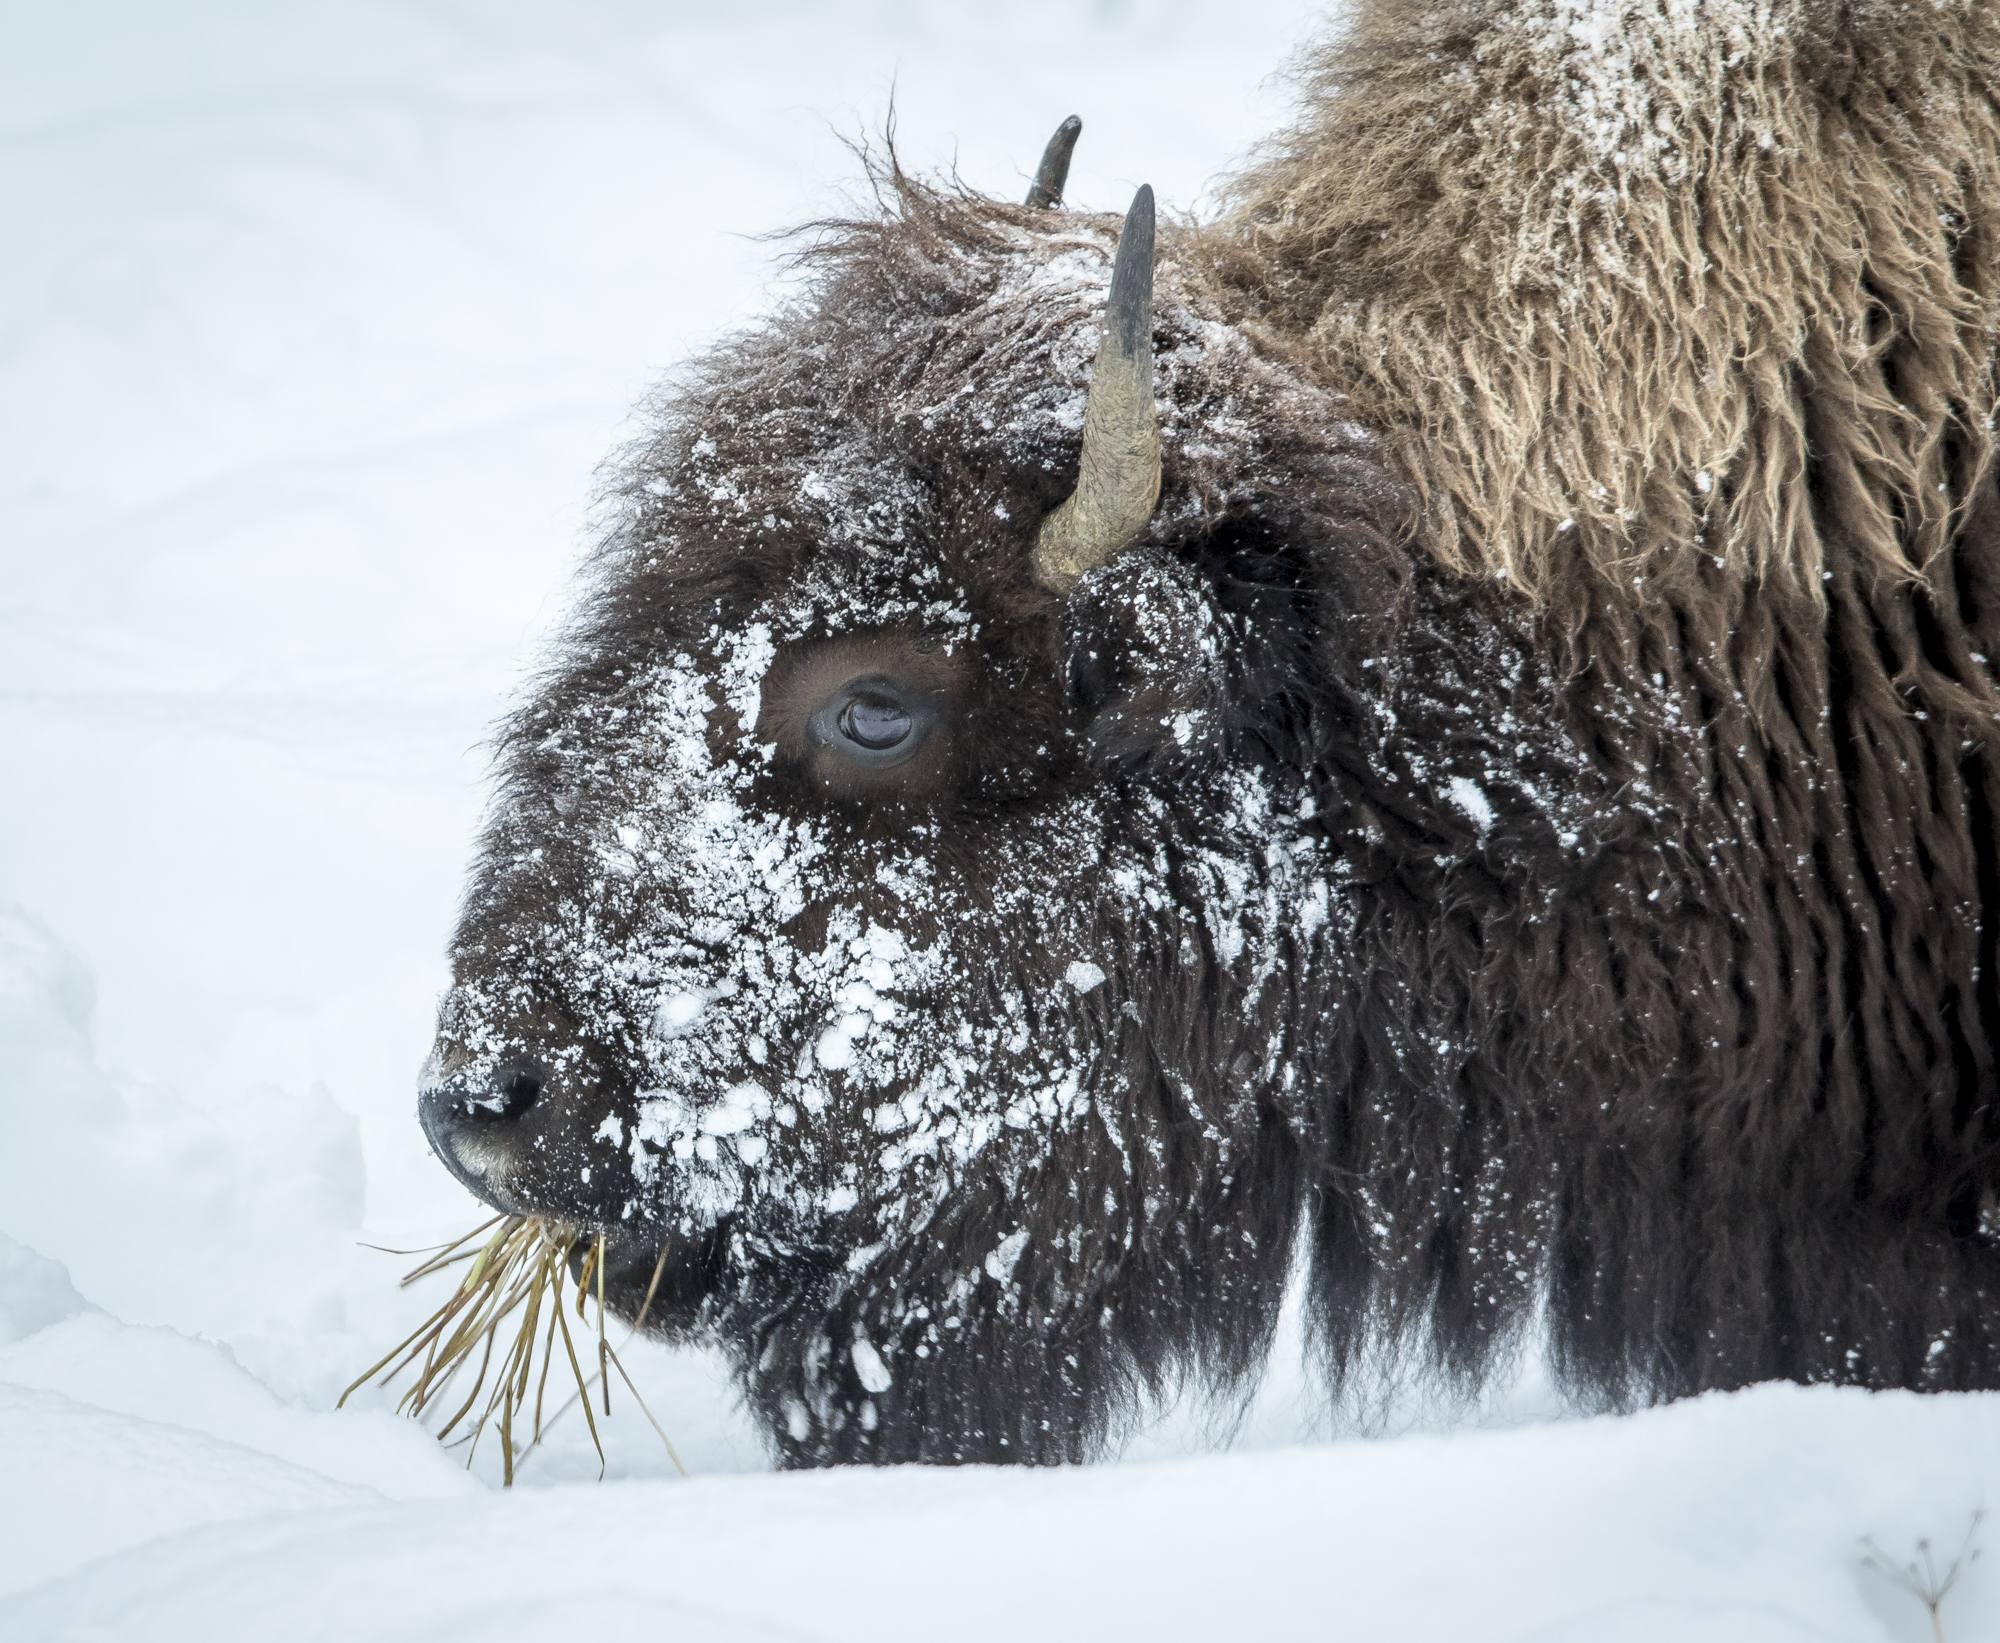 Snowy bison face